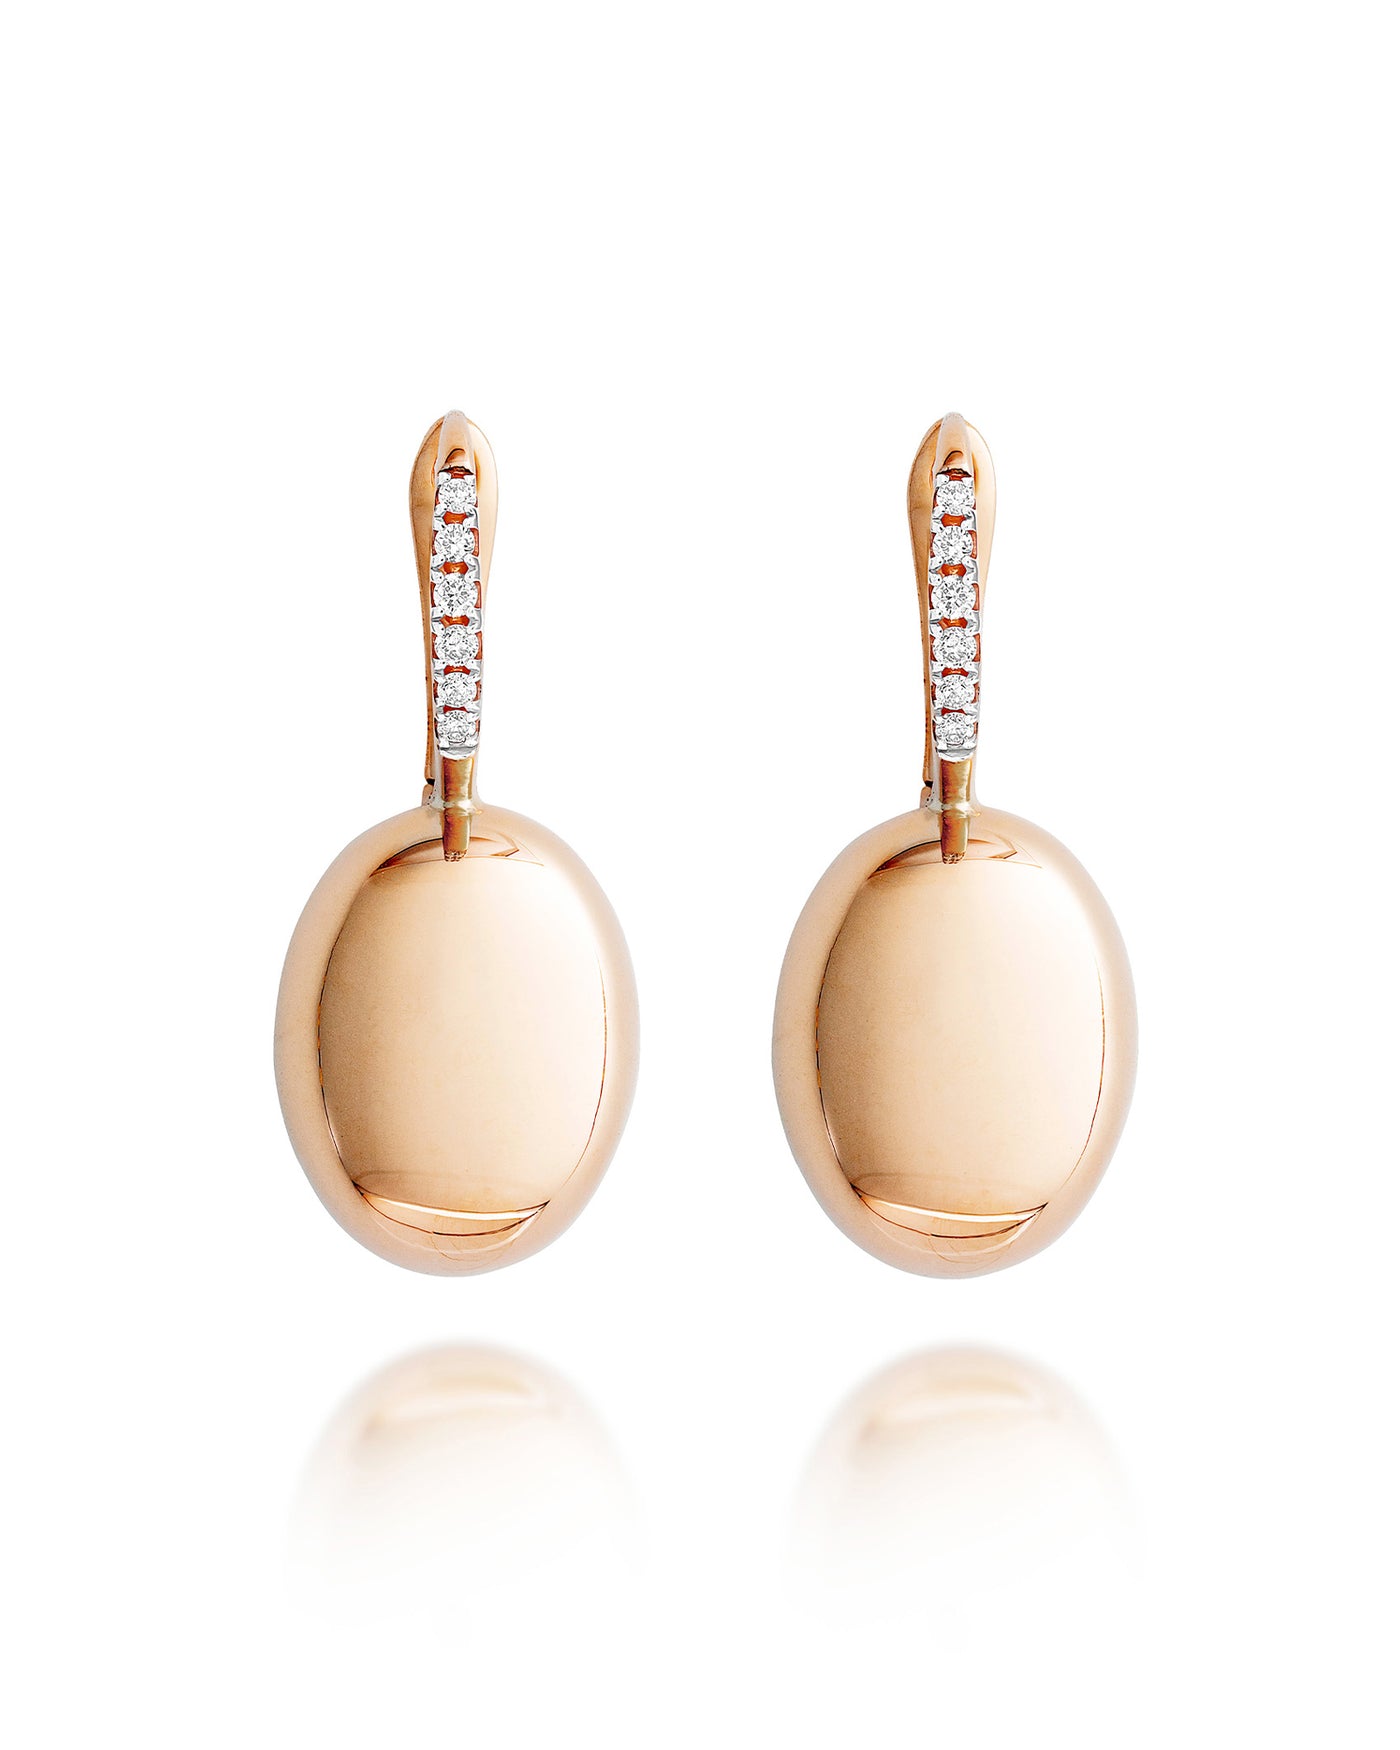 "ciliegine" rose gold boules and diamonds details earrings (medium)